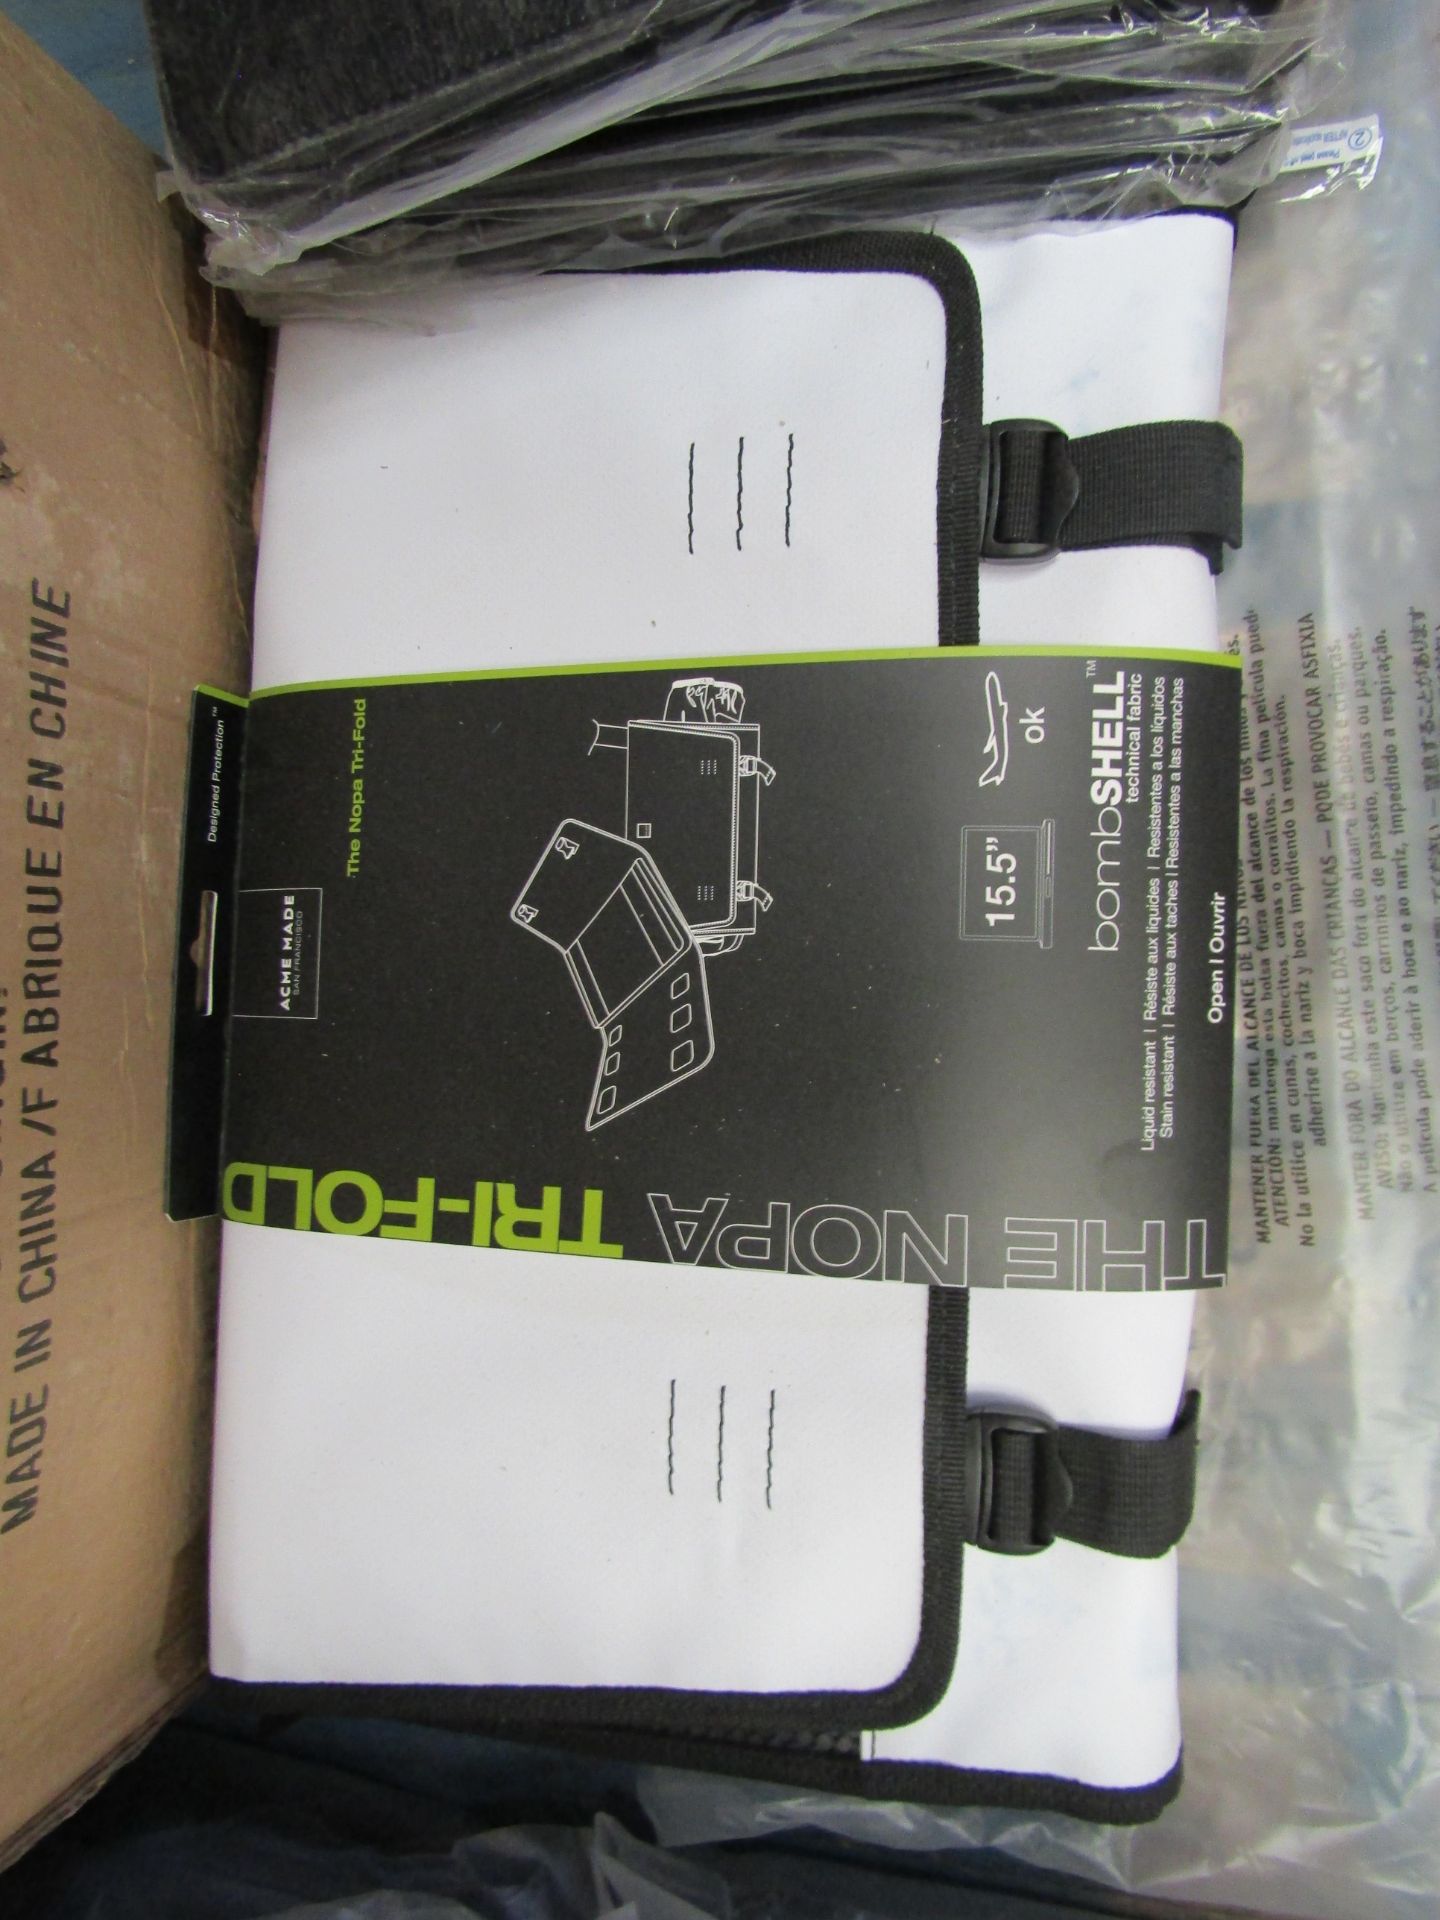 2 x The Nopa Tri-Fold 15.5" Tablet Holders. New with tags